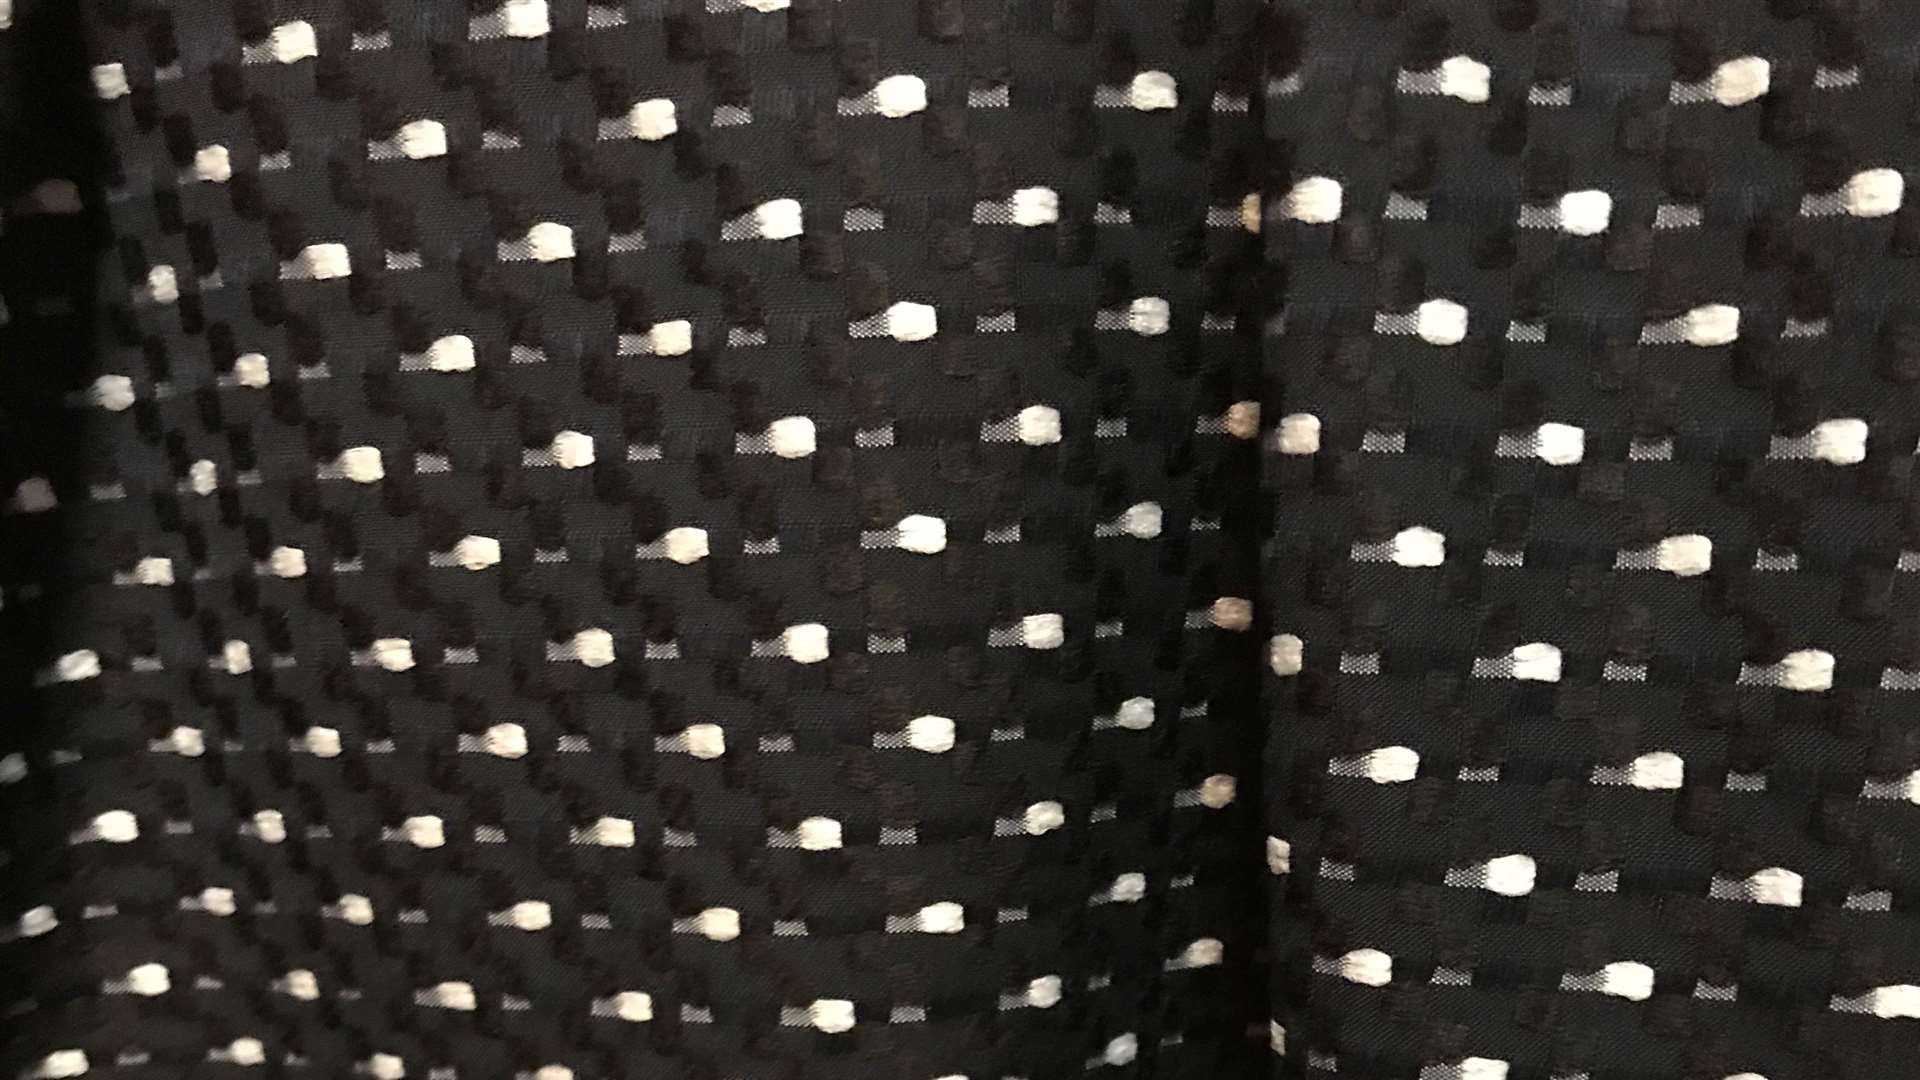 The pattern of the dress